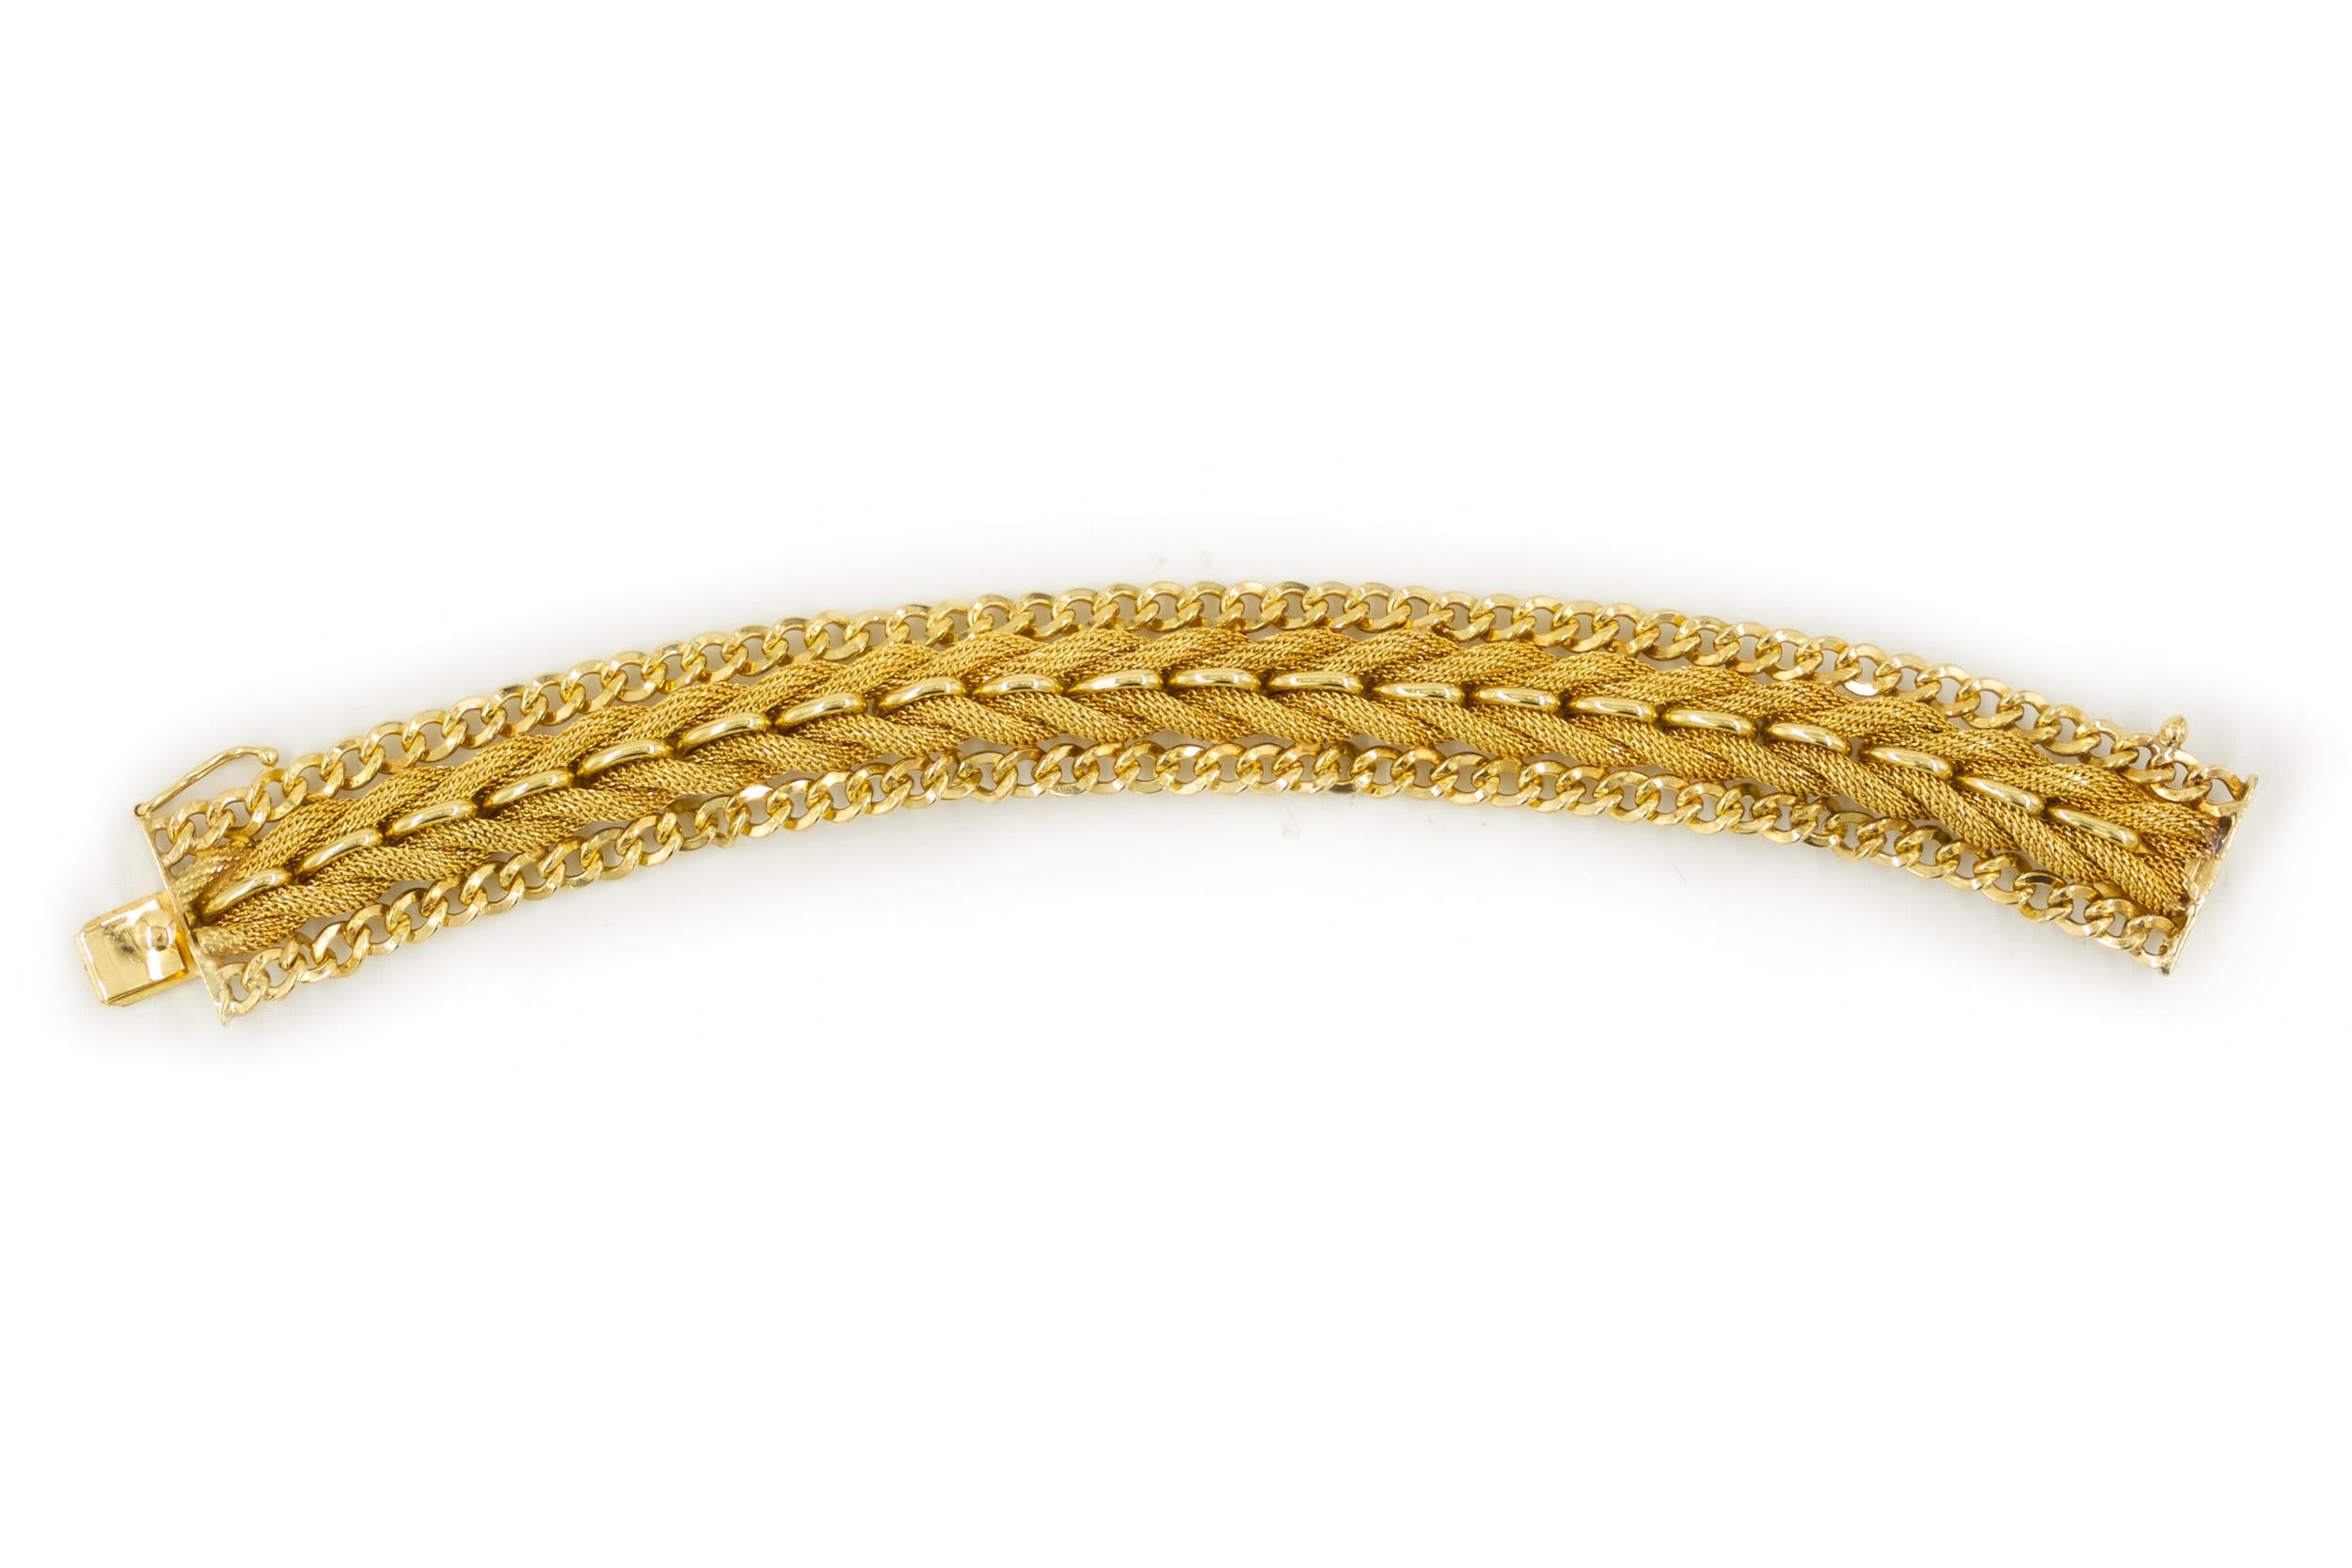 American Vintage 14k Gold Woven and Chain-Link Bracelet by AGC circa 1990  6 3/4